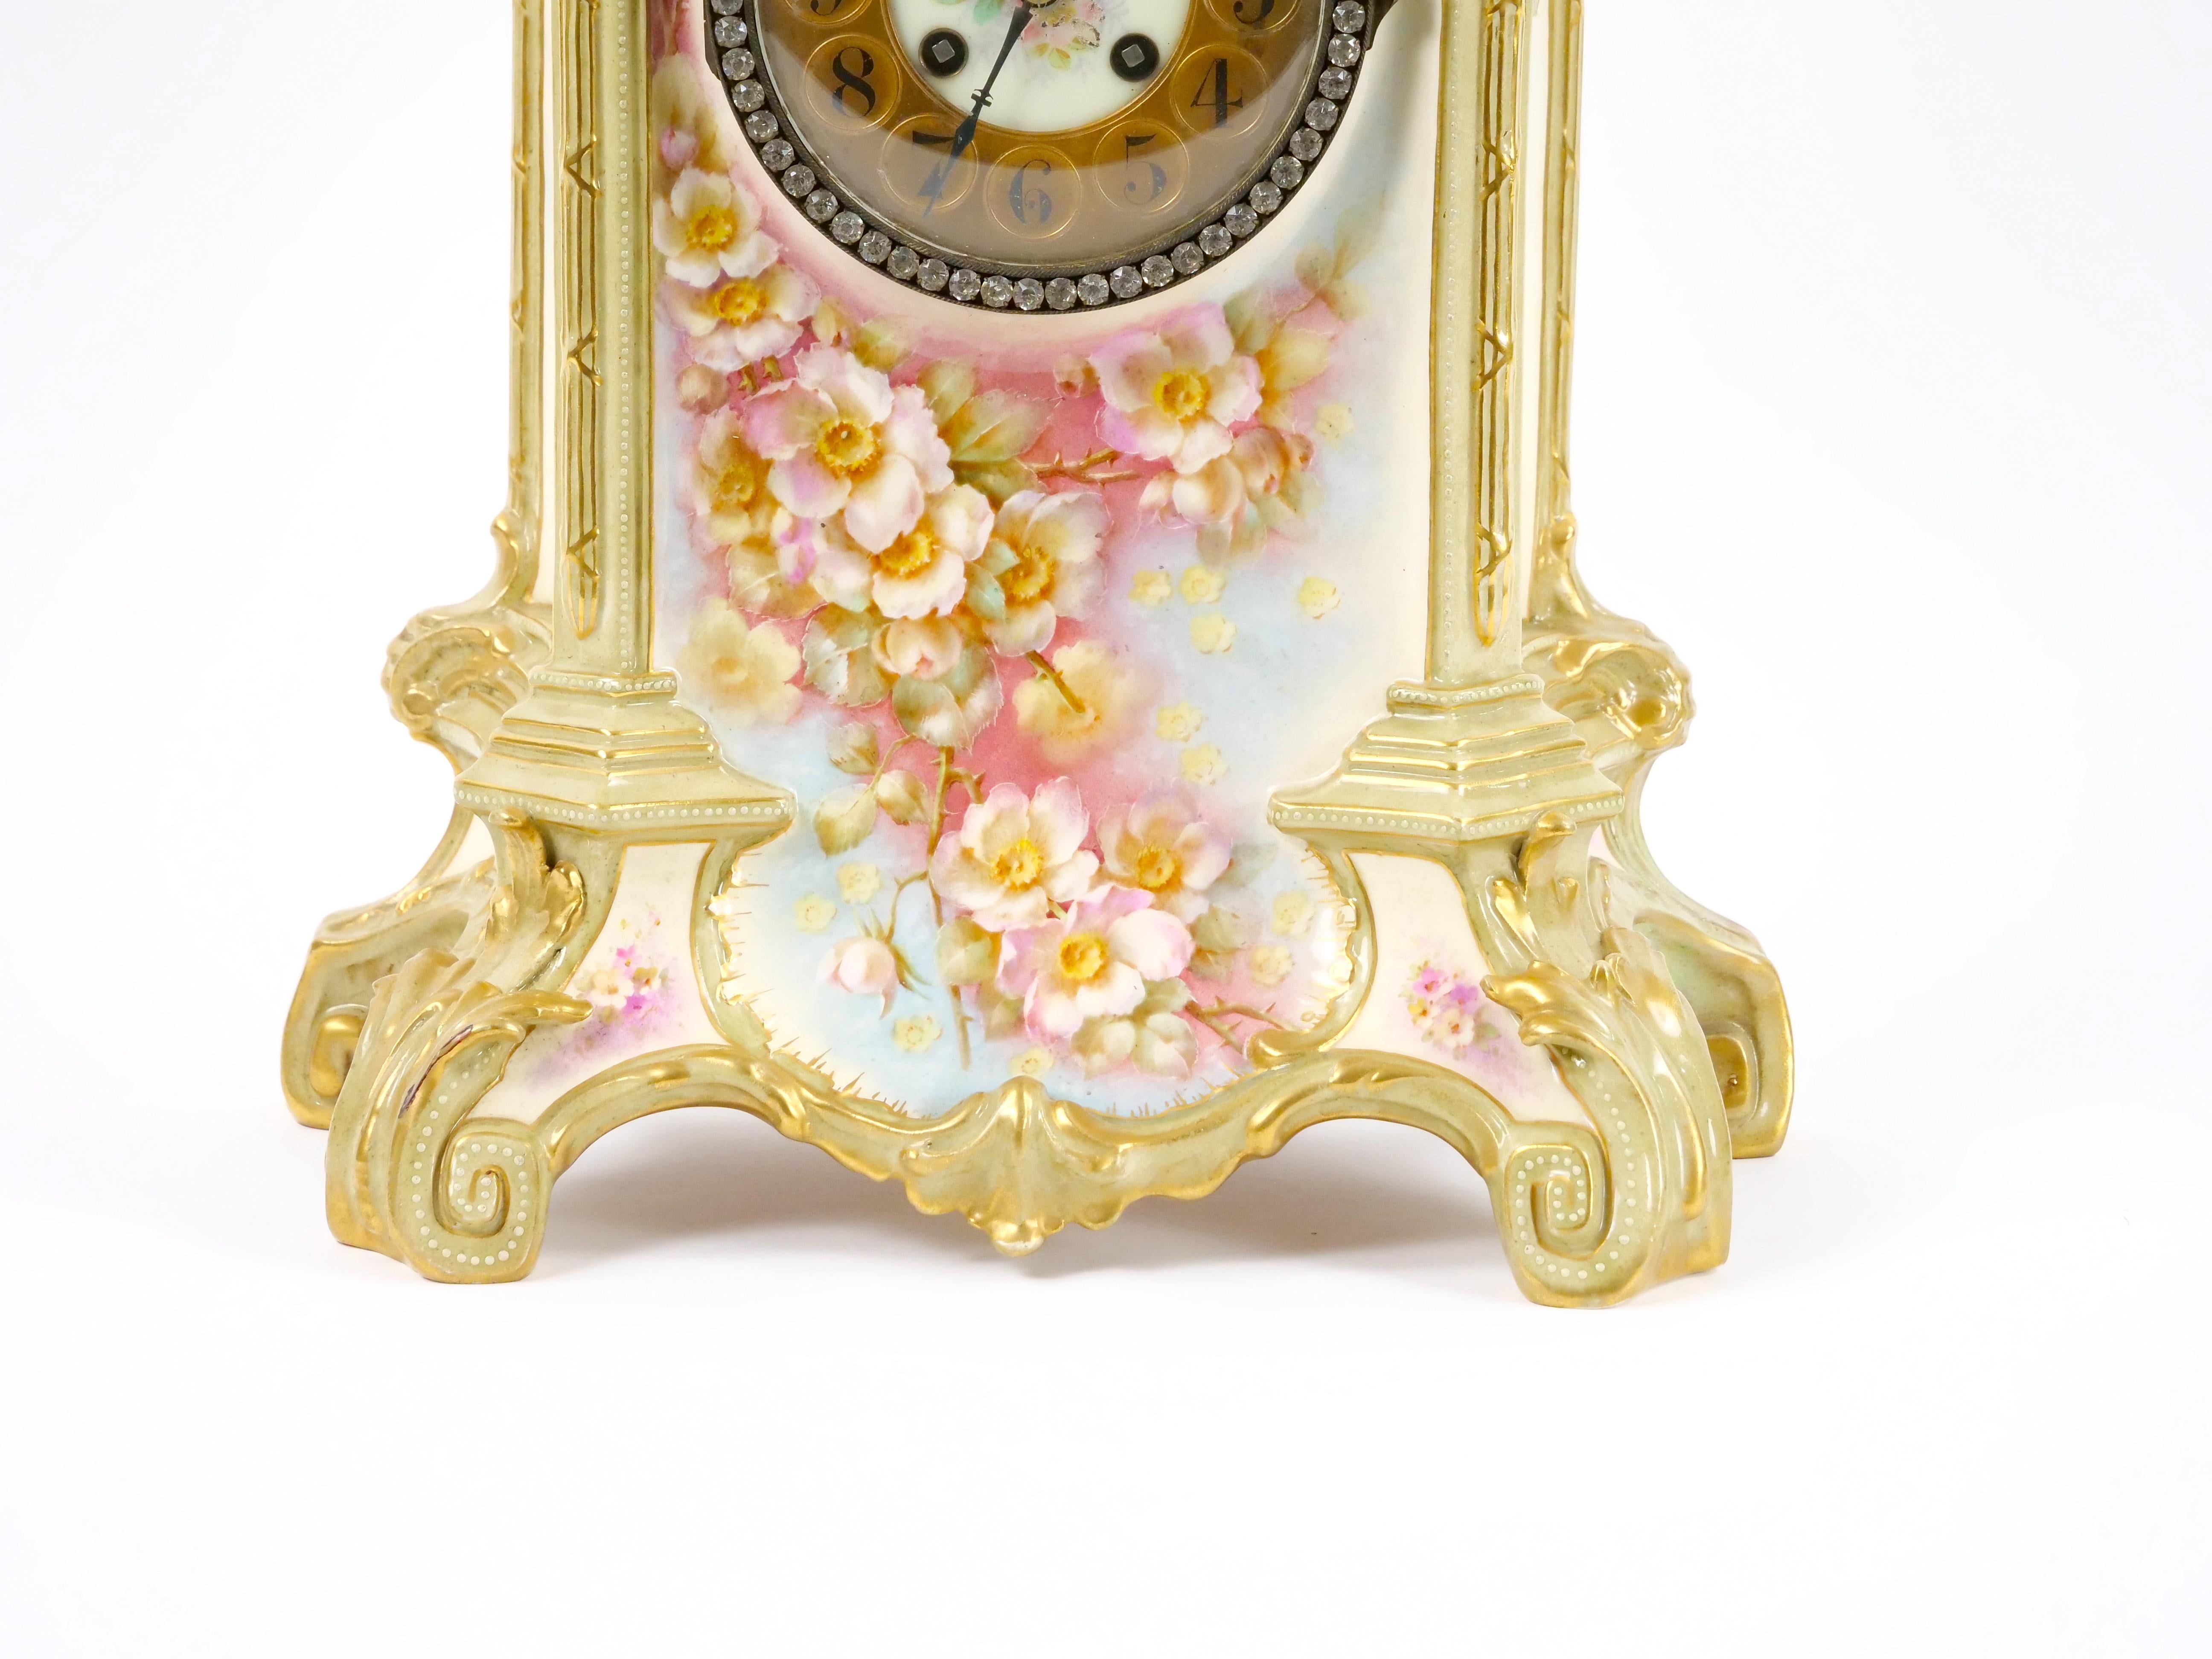 Hand-Carved 19th Century French Hand Painted/Gilt Decorated Porcelain Mantel Clock